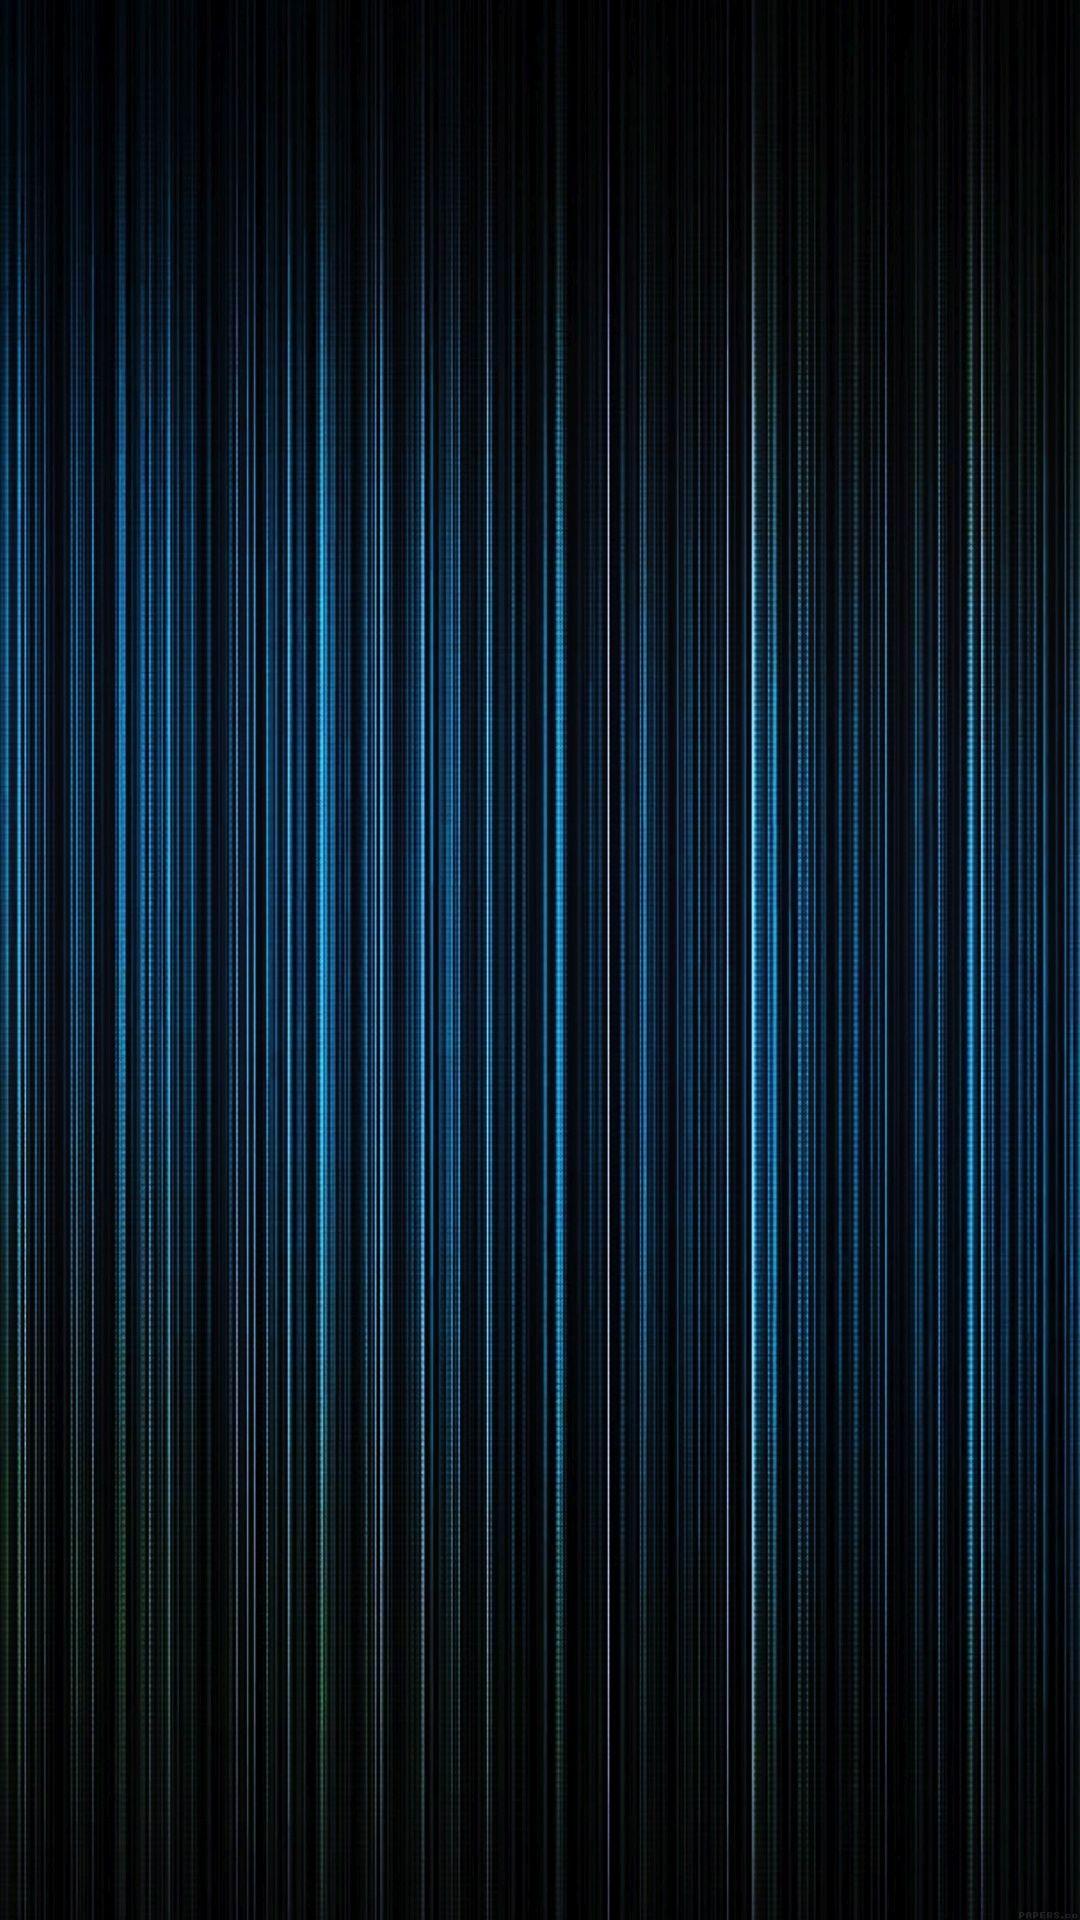 Vertical Blue Lines Abstract iPhone HD Wallpaper wallpaper for iPhone 6 and iPhone. Android wallpaper blue, Android wallpaper, Black iphone background